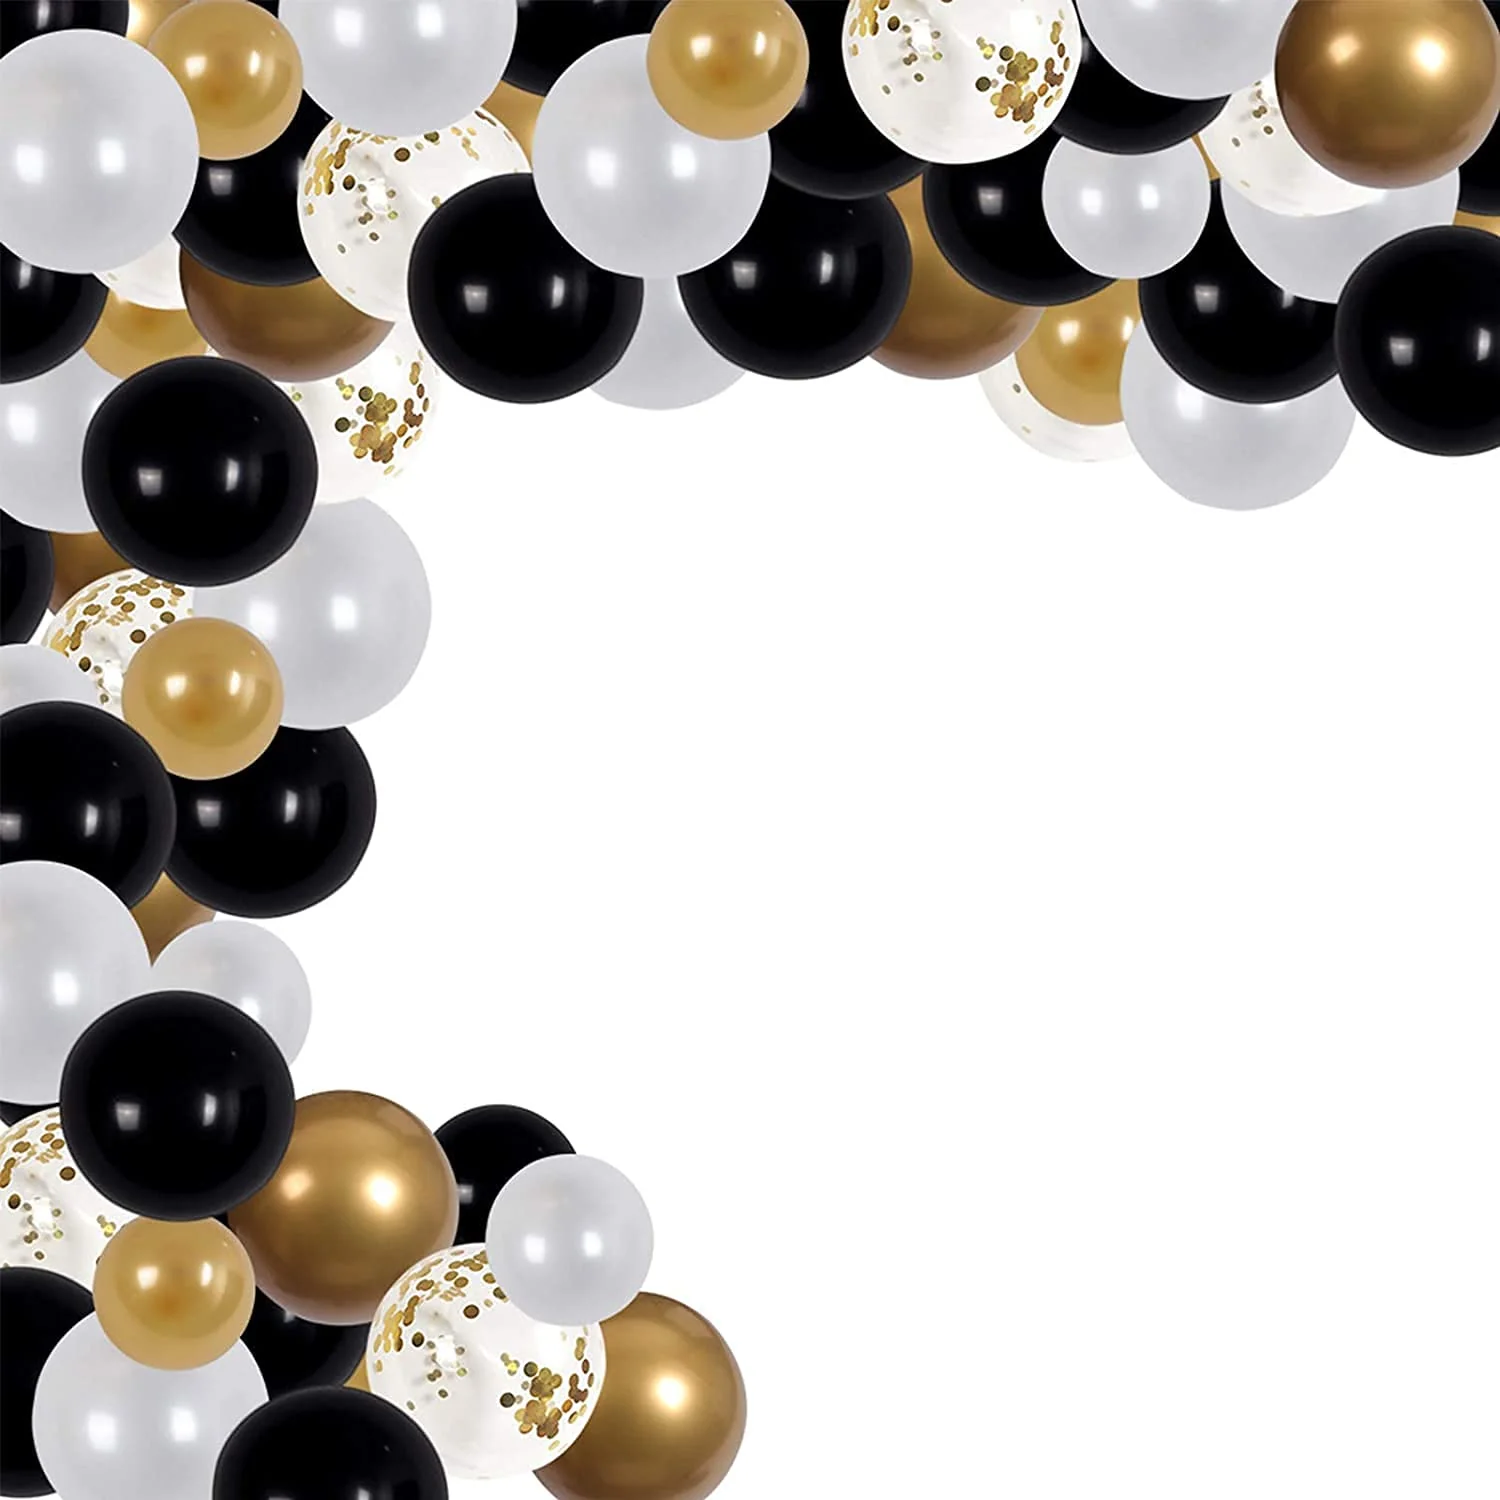 Black and Gold Balloons with Gold Ribbons .jpg